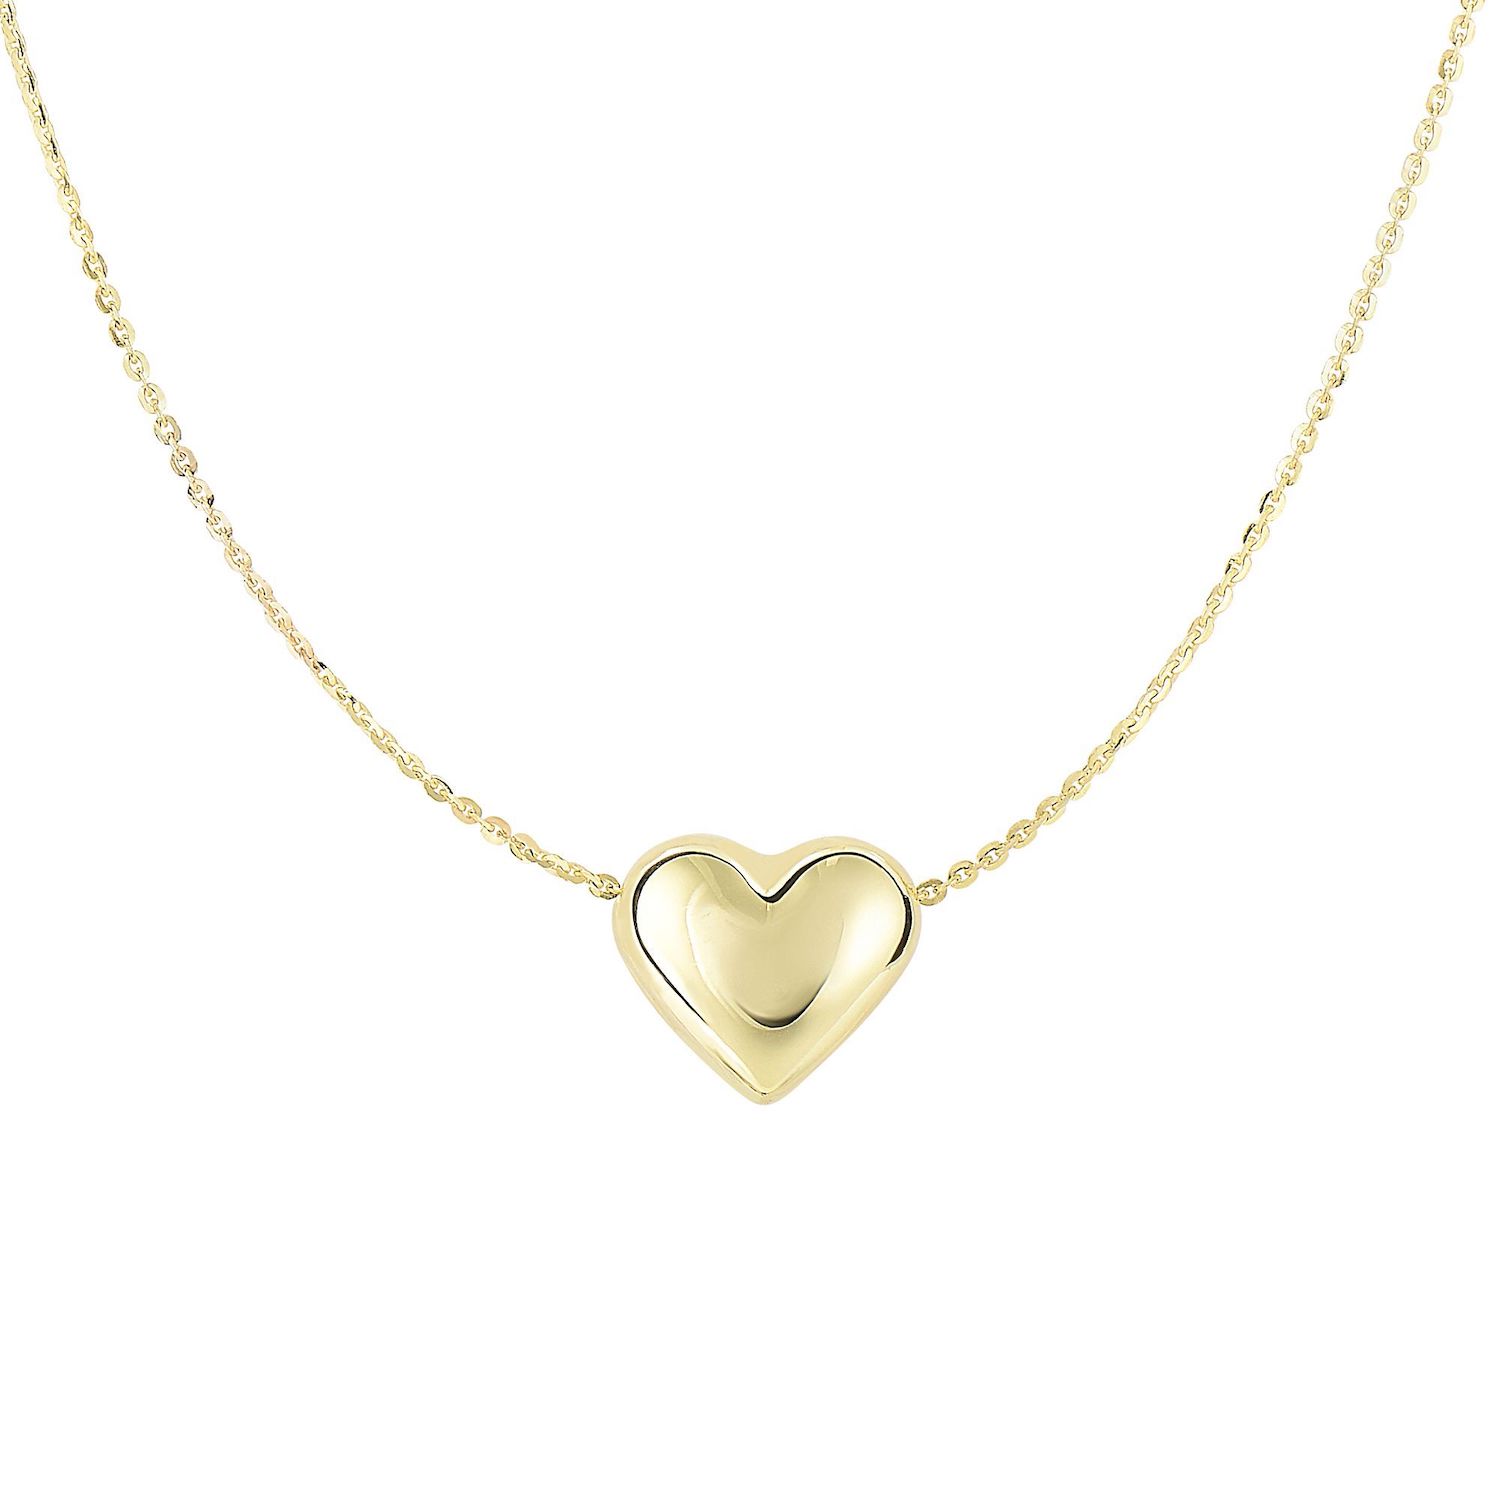 14K Yellow Gold Puffed Heart Pendant Chain Necklace 18"